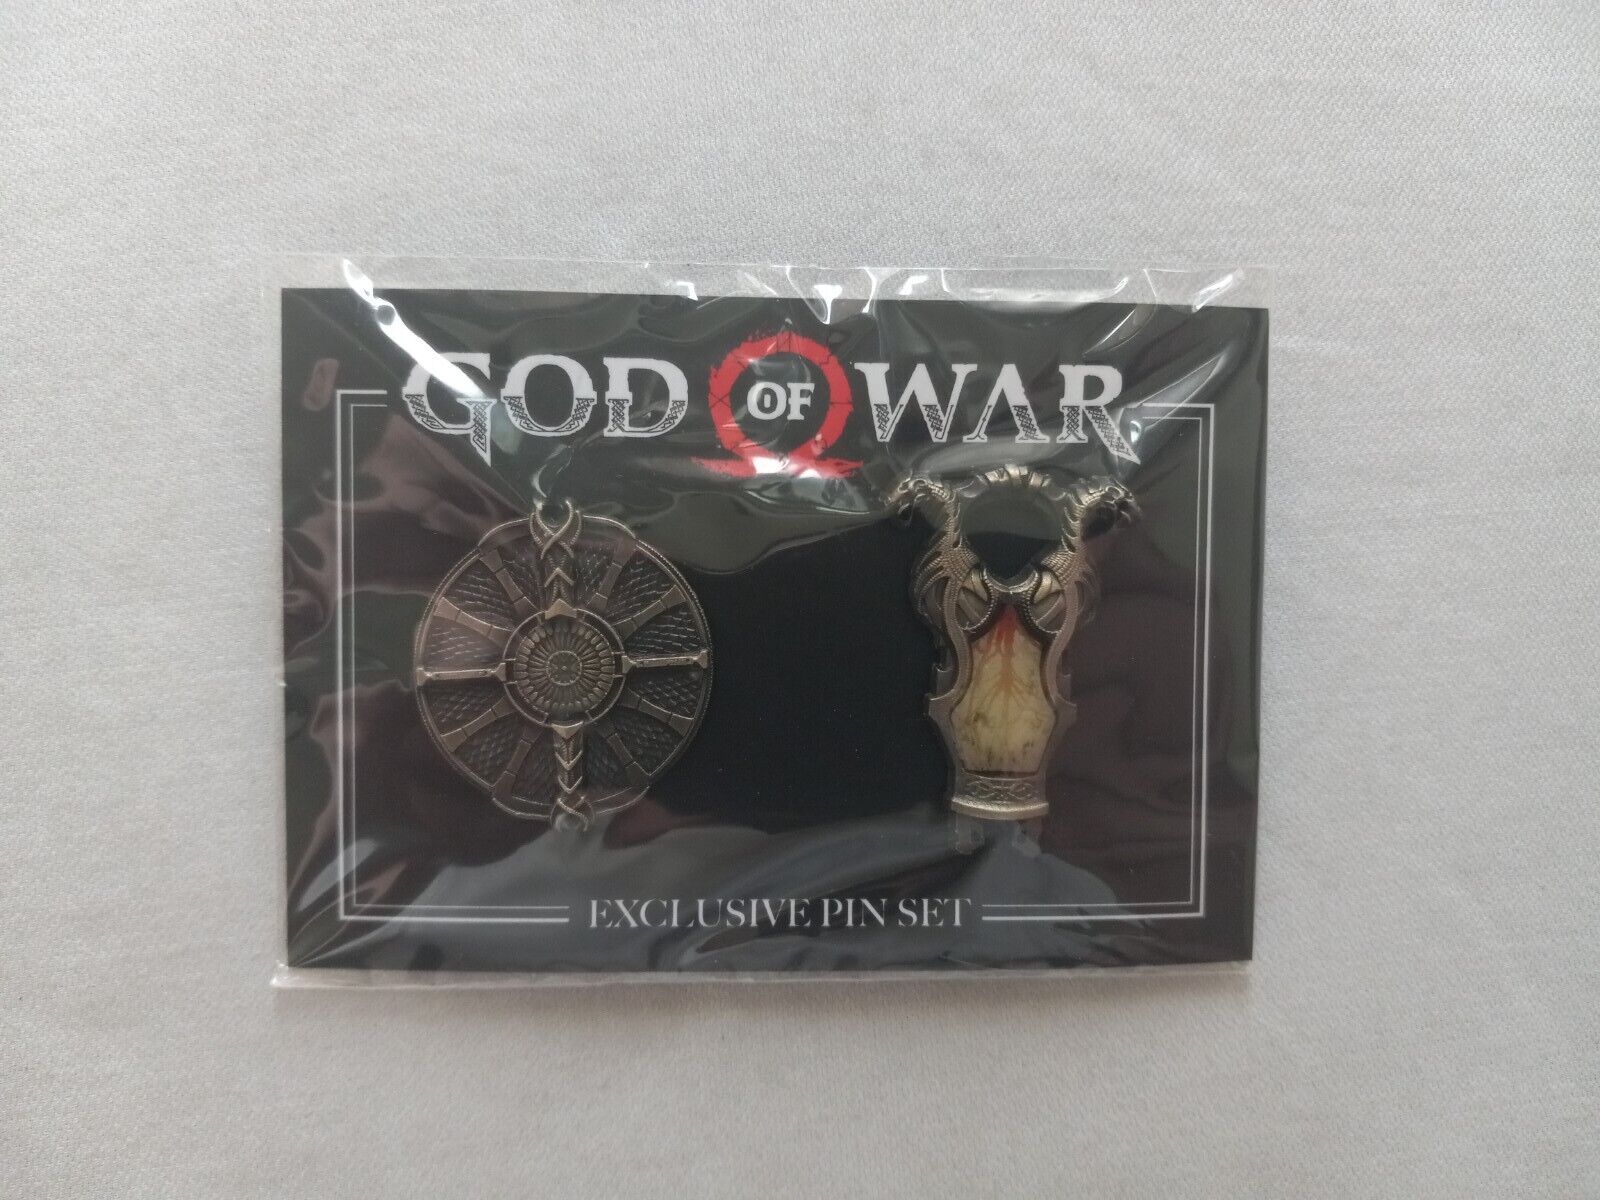 God Of War Loot Gaming Exclusive Pin Set Loot Crate limited edition rare 2018